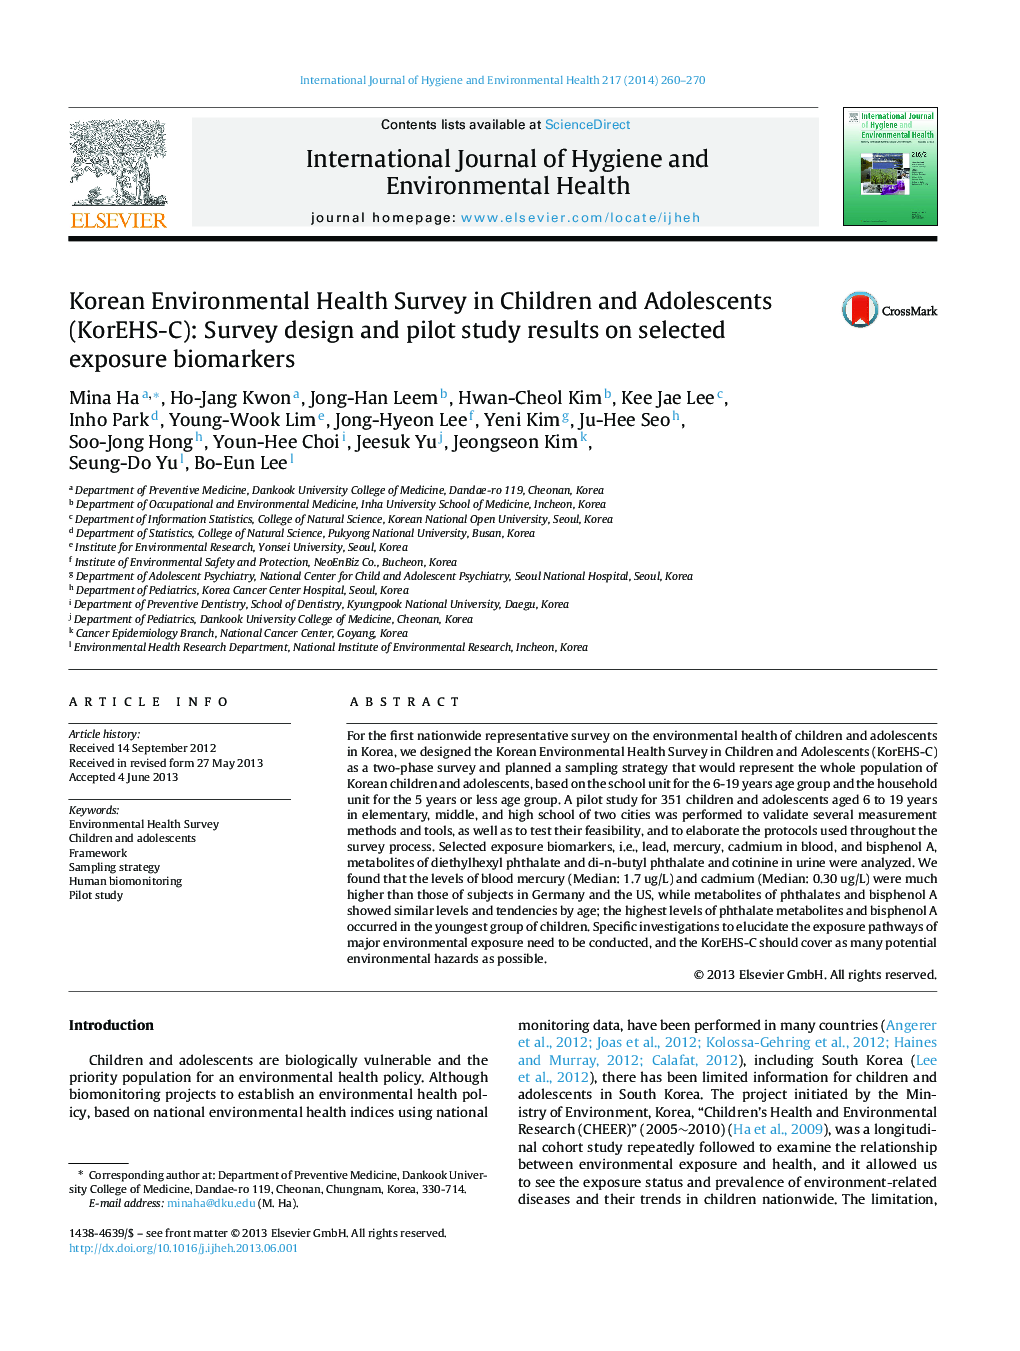 Korean Environmental Health Survey in Children and Adolescents (KorEHS-C): Survey design and pilot study results on selected exposure biomarkers